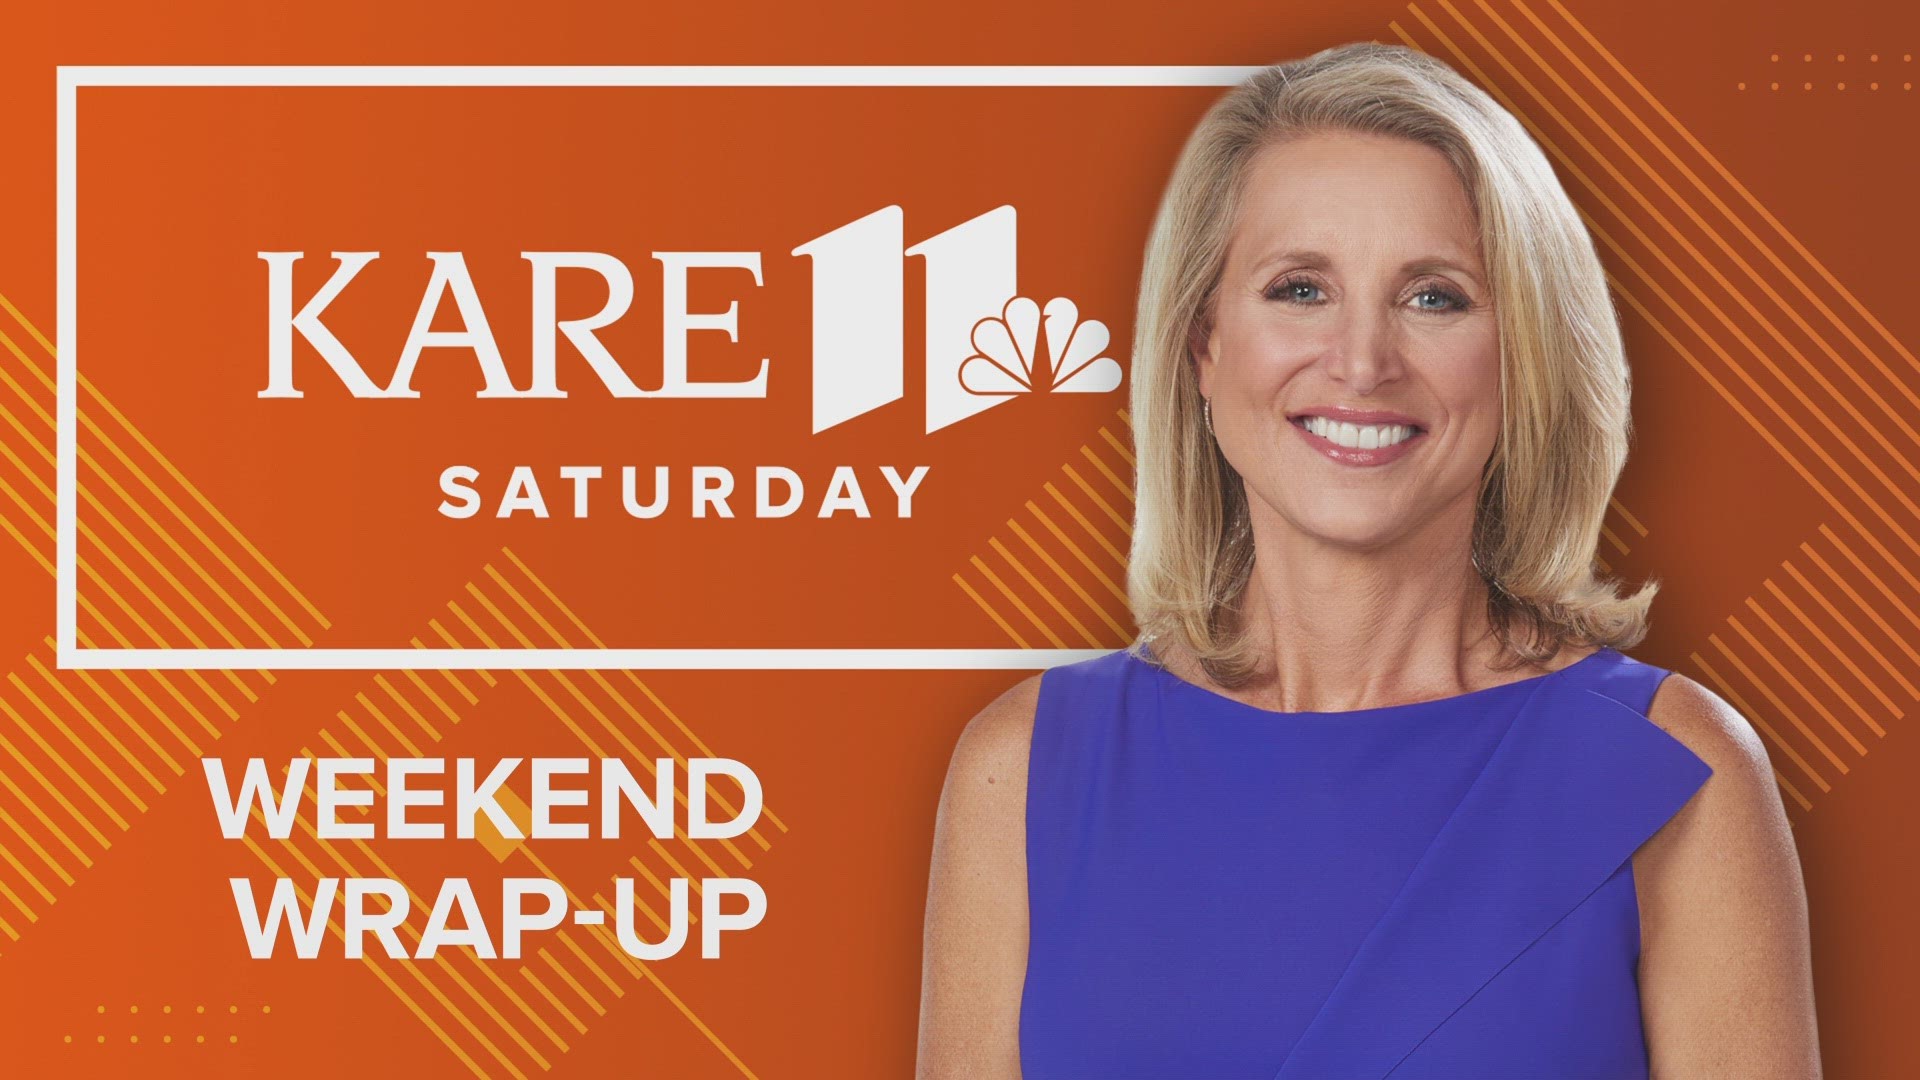 Check out the best segments from the KARE 11 Saturday show on May 20, 2023.